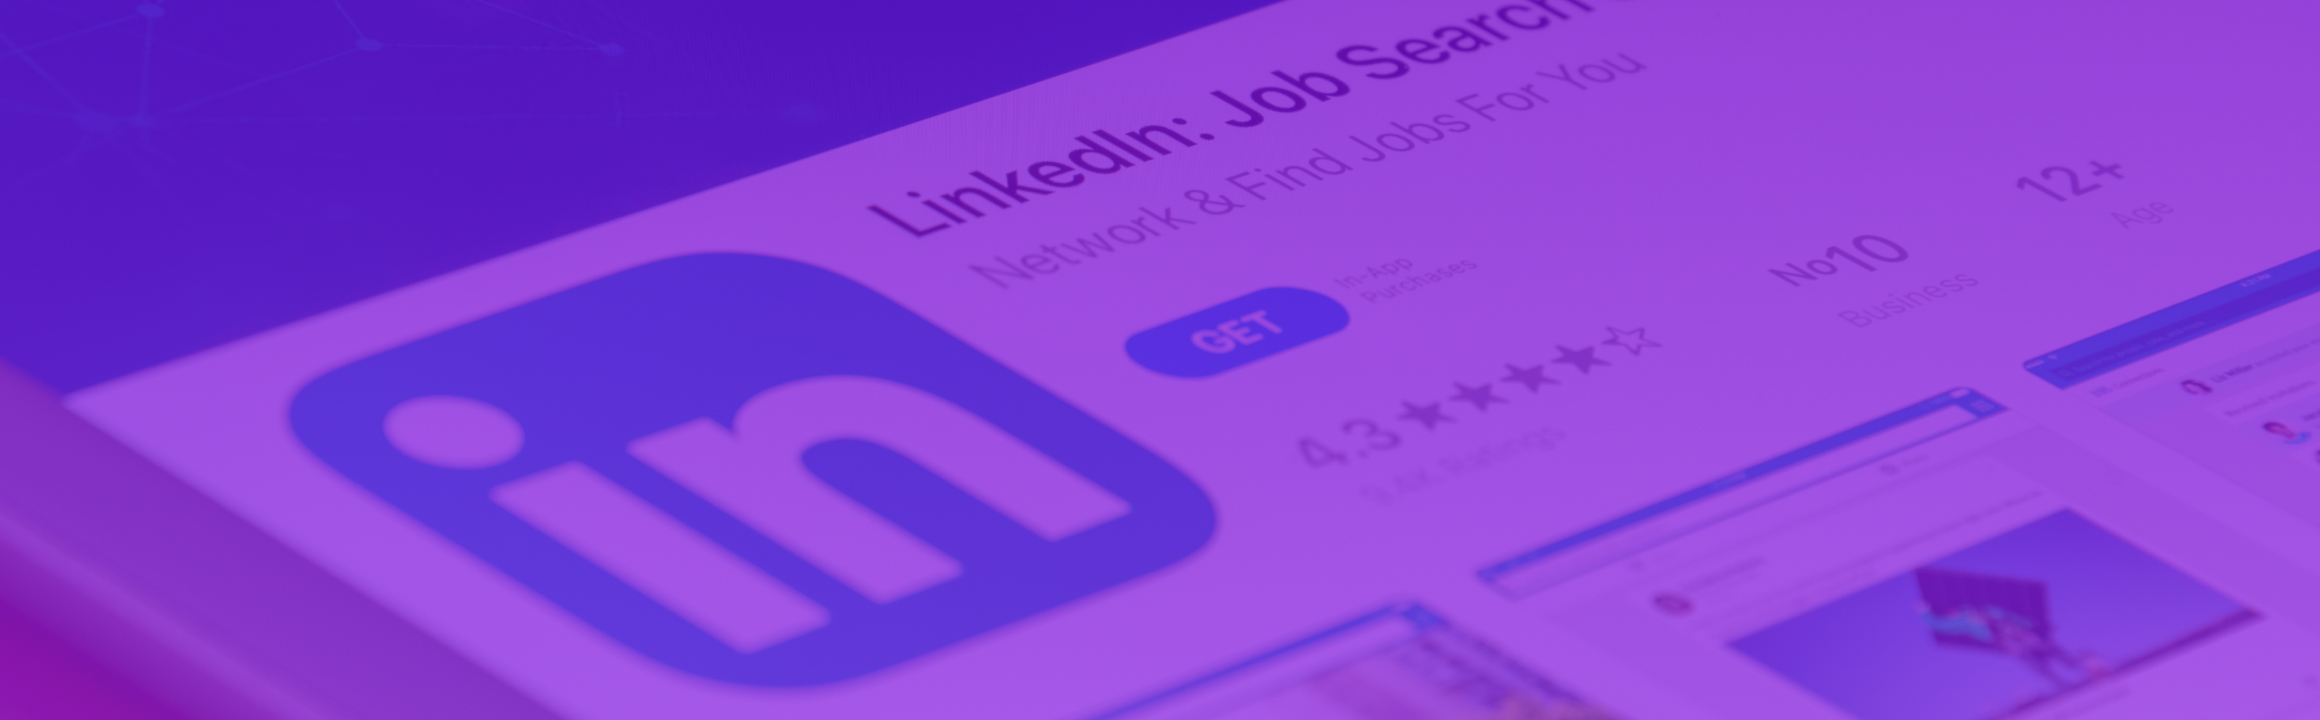 How to create a LinkedIn profile that stands out